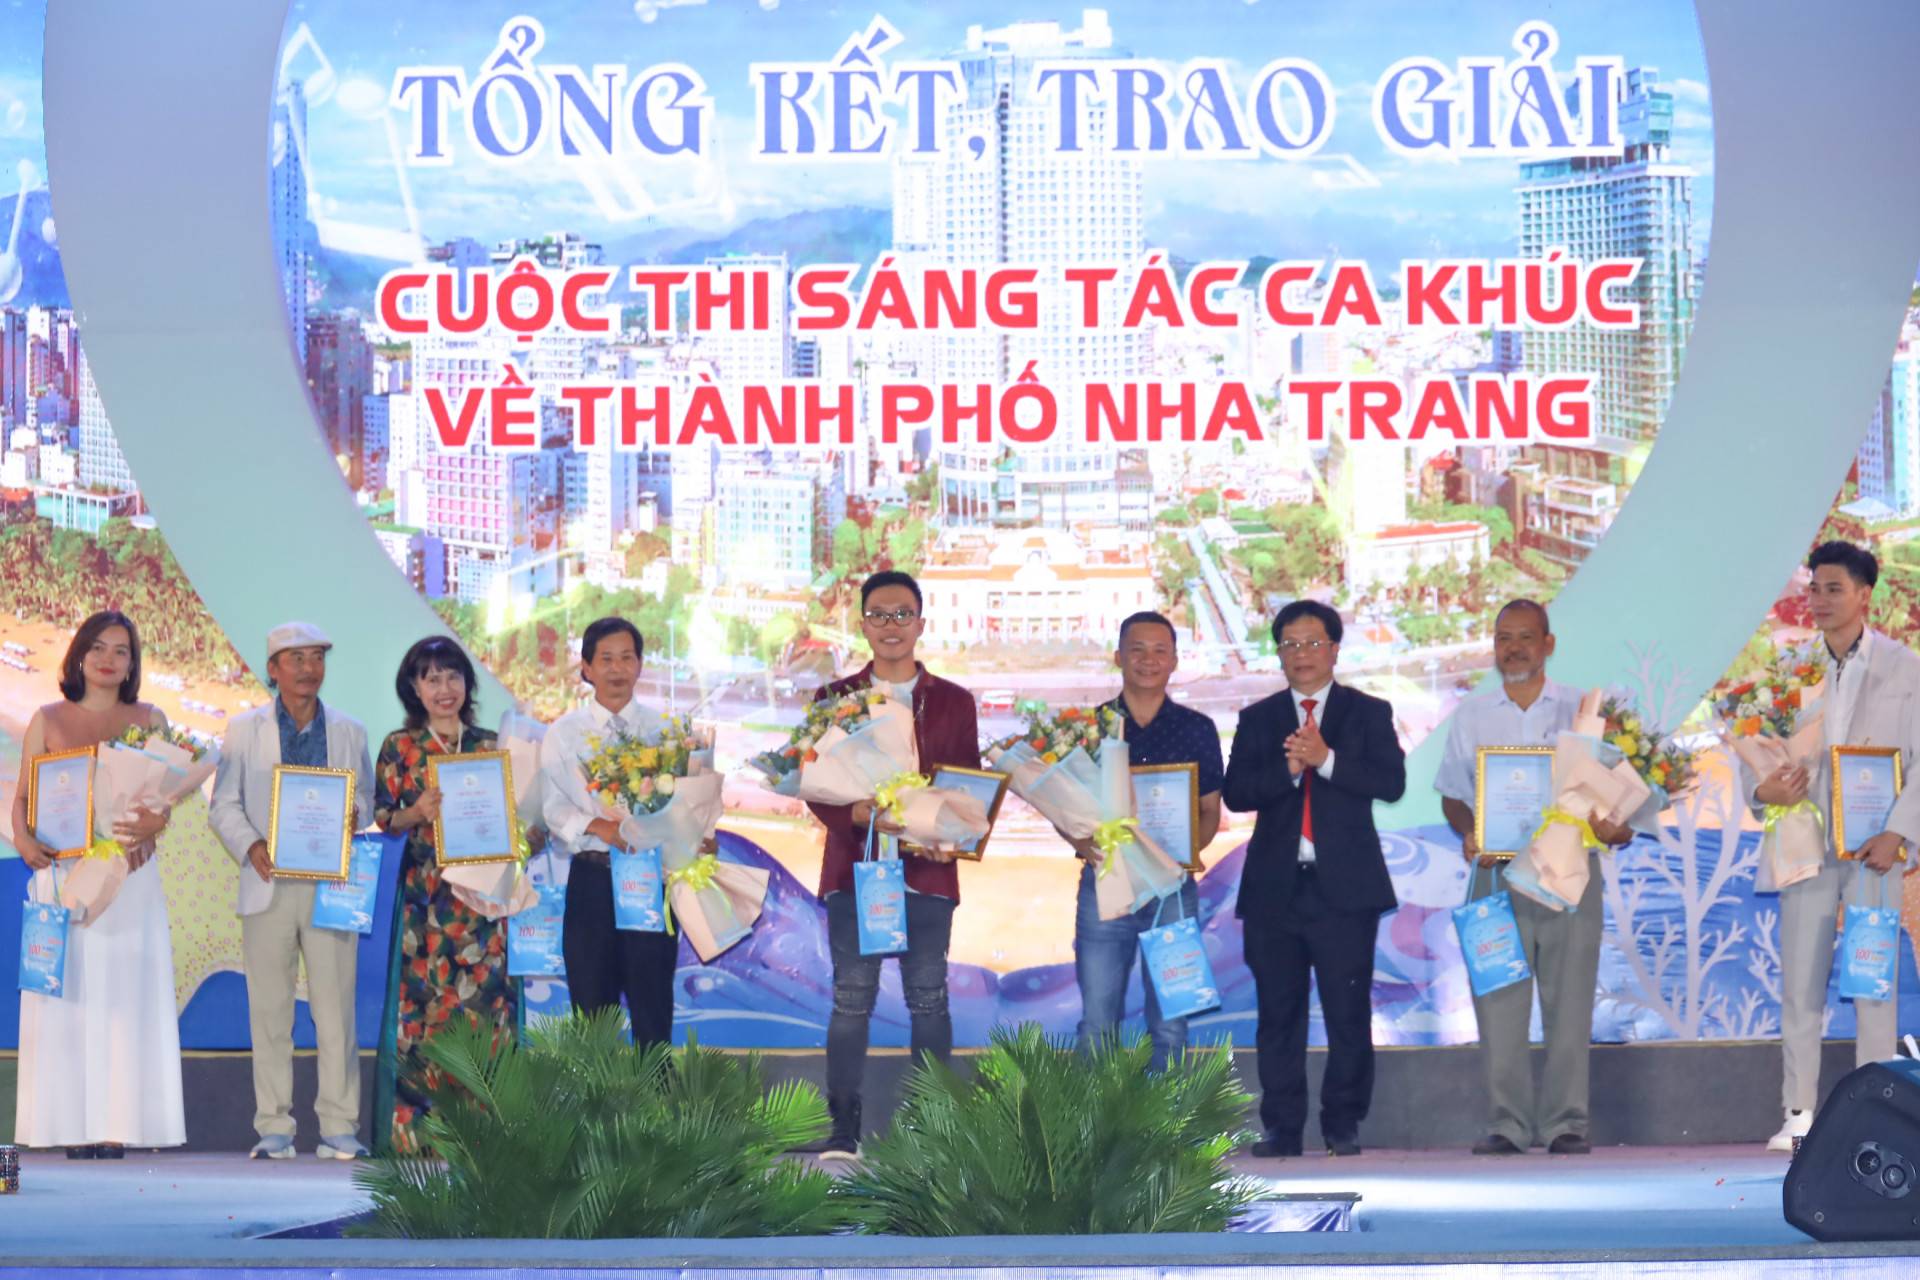 Ho Van Mung giving prizes to Le Thanh Nhat Minh and other contest winners.

